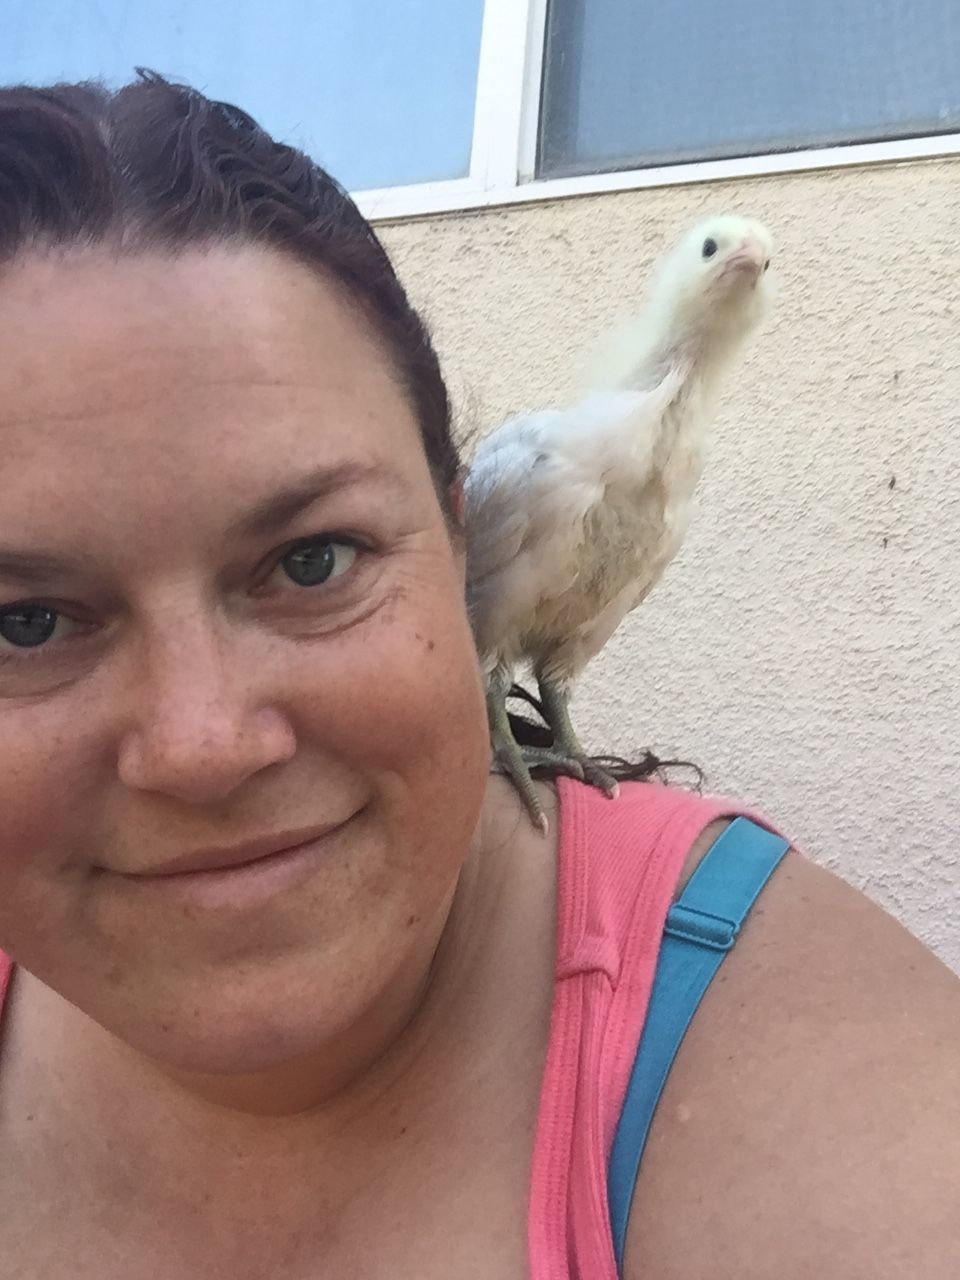 She's terrified of the other similar sized chicks and frequently sticks to my side, though freaks out if I pick her up lol